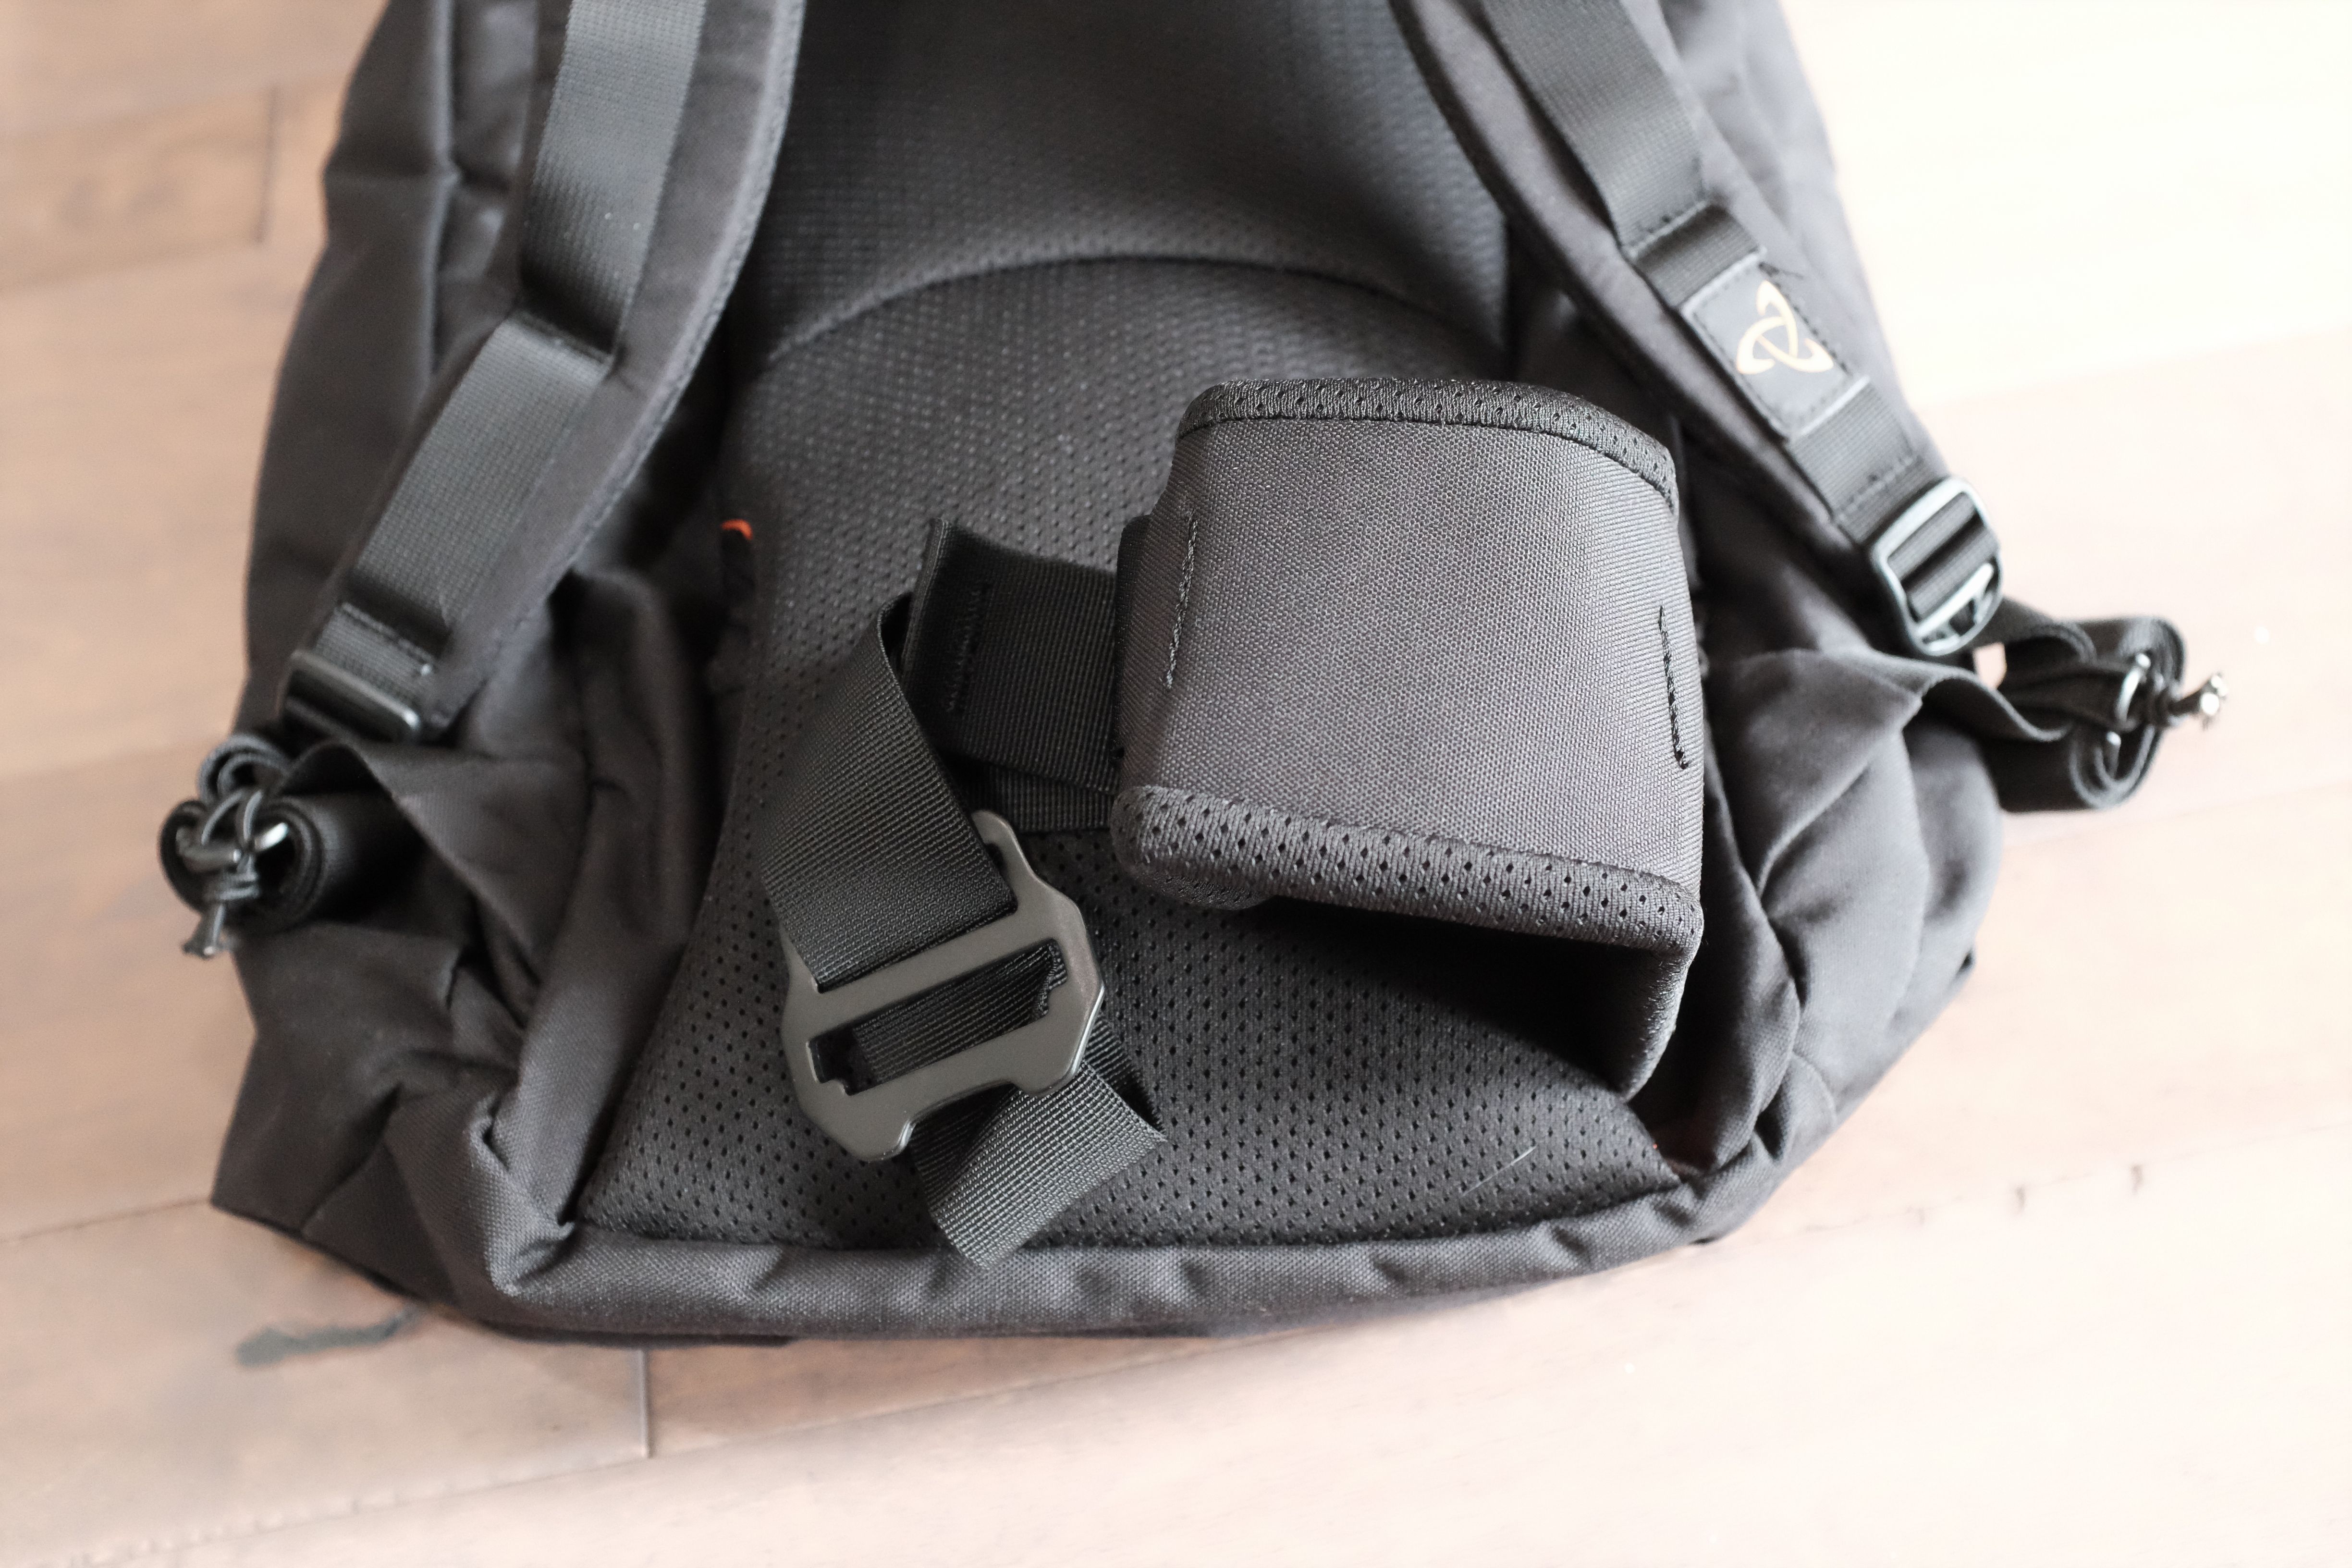 Mystery Ranch x Carryology Assault, aka ‘Unicorn’ – The Brooks Review